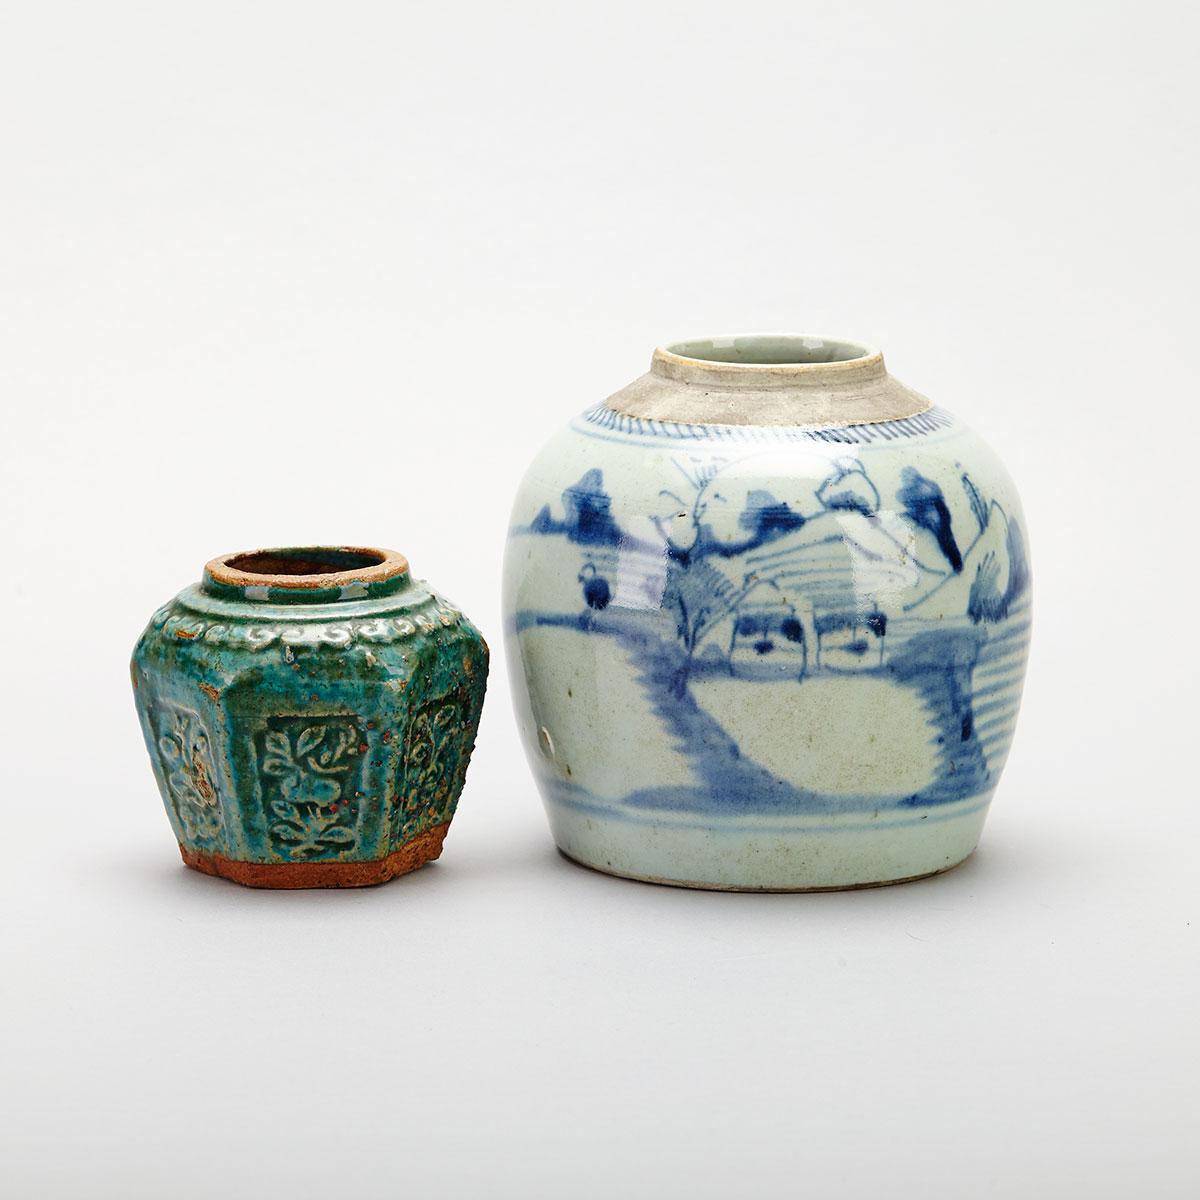 Two Chinese Ceramic Wares, 19th Century or Earlier